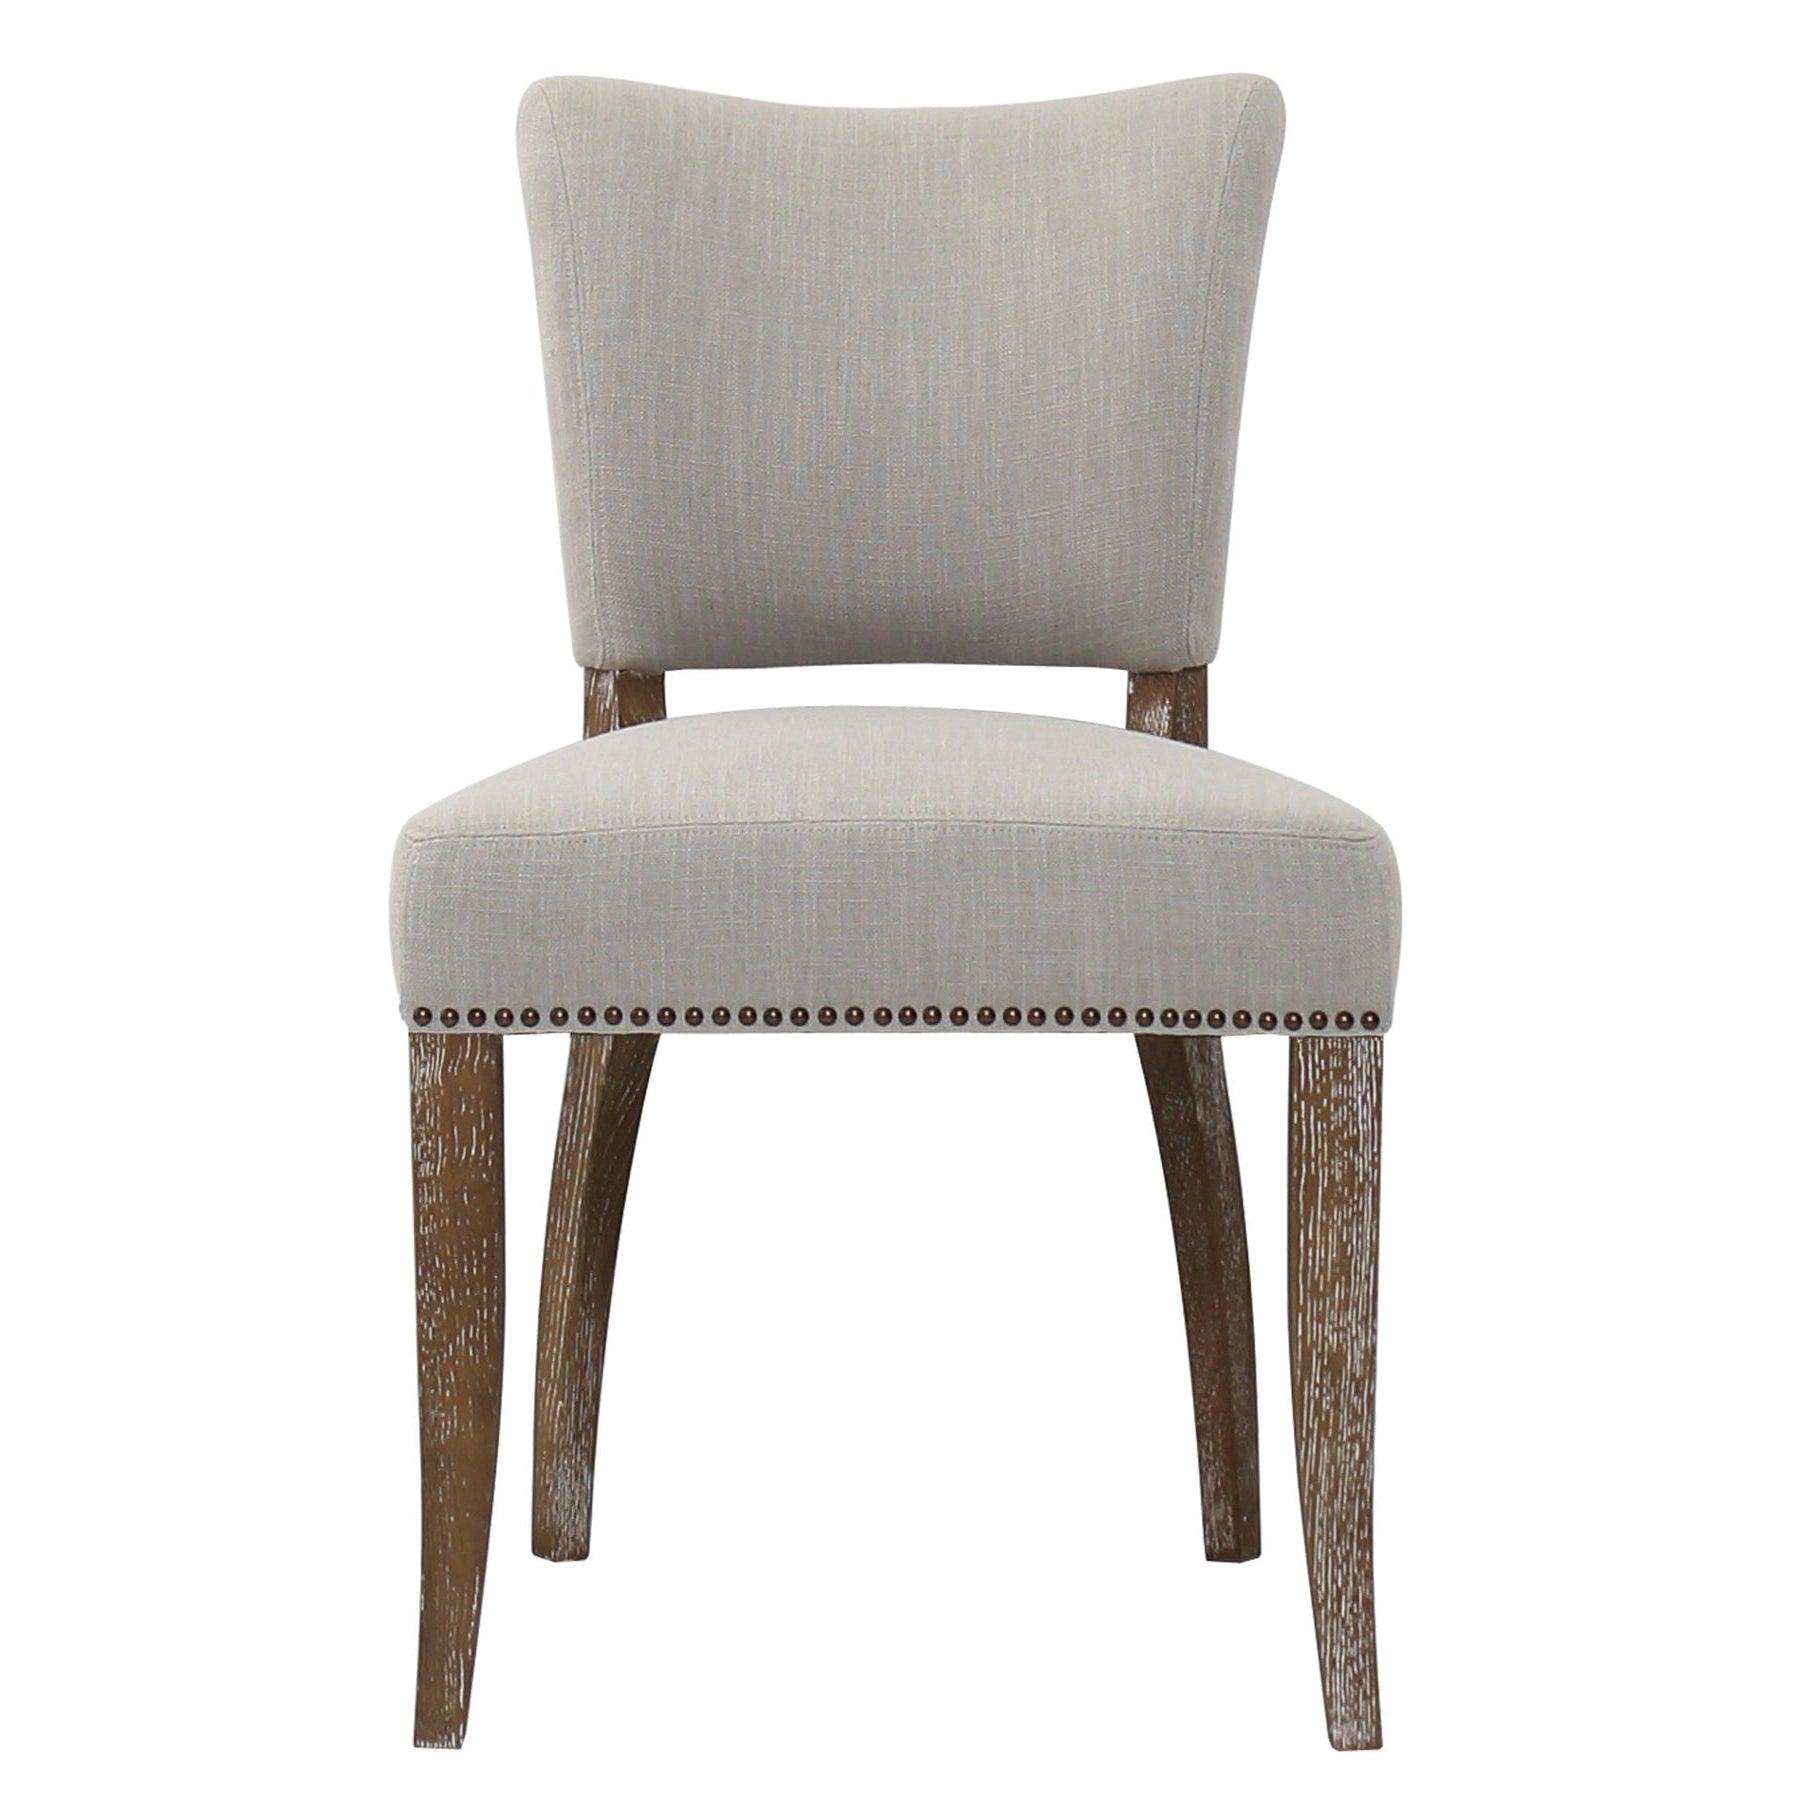 Light Beige 2PC Dining Chairs Set Armless with Floating Back - Sideboards and Things Back Type_Floating Back, Back Type_With Back, Brand_LH Imports, Color_Gray, Legs Material_Wood, Number of Pieces_2PC Set, Product Type_Dining Height, Seat Material_Upholstery, Shape_Armless, Upholstery Type_Fabric Blend, Wood Species_Oak